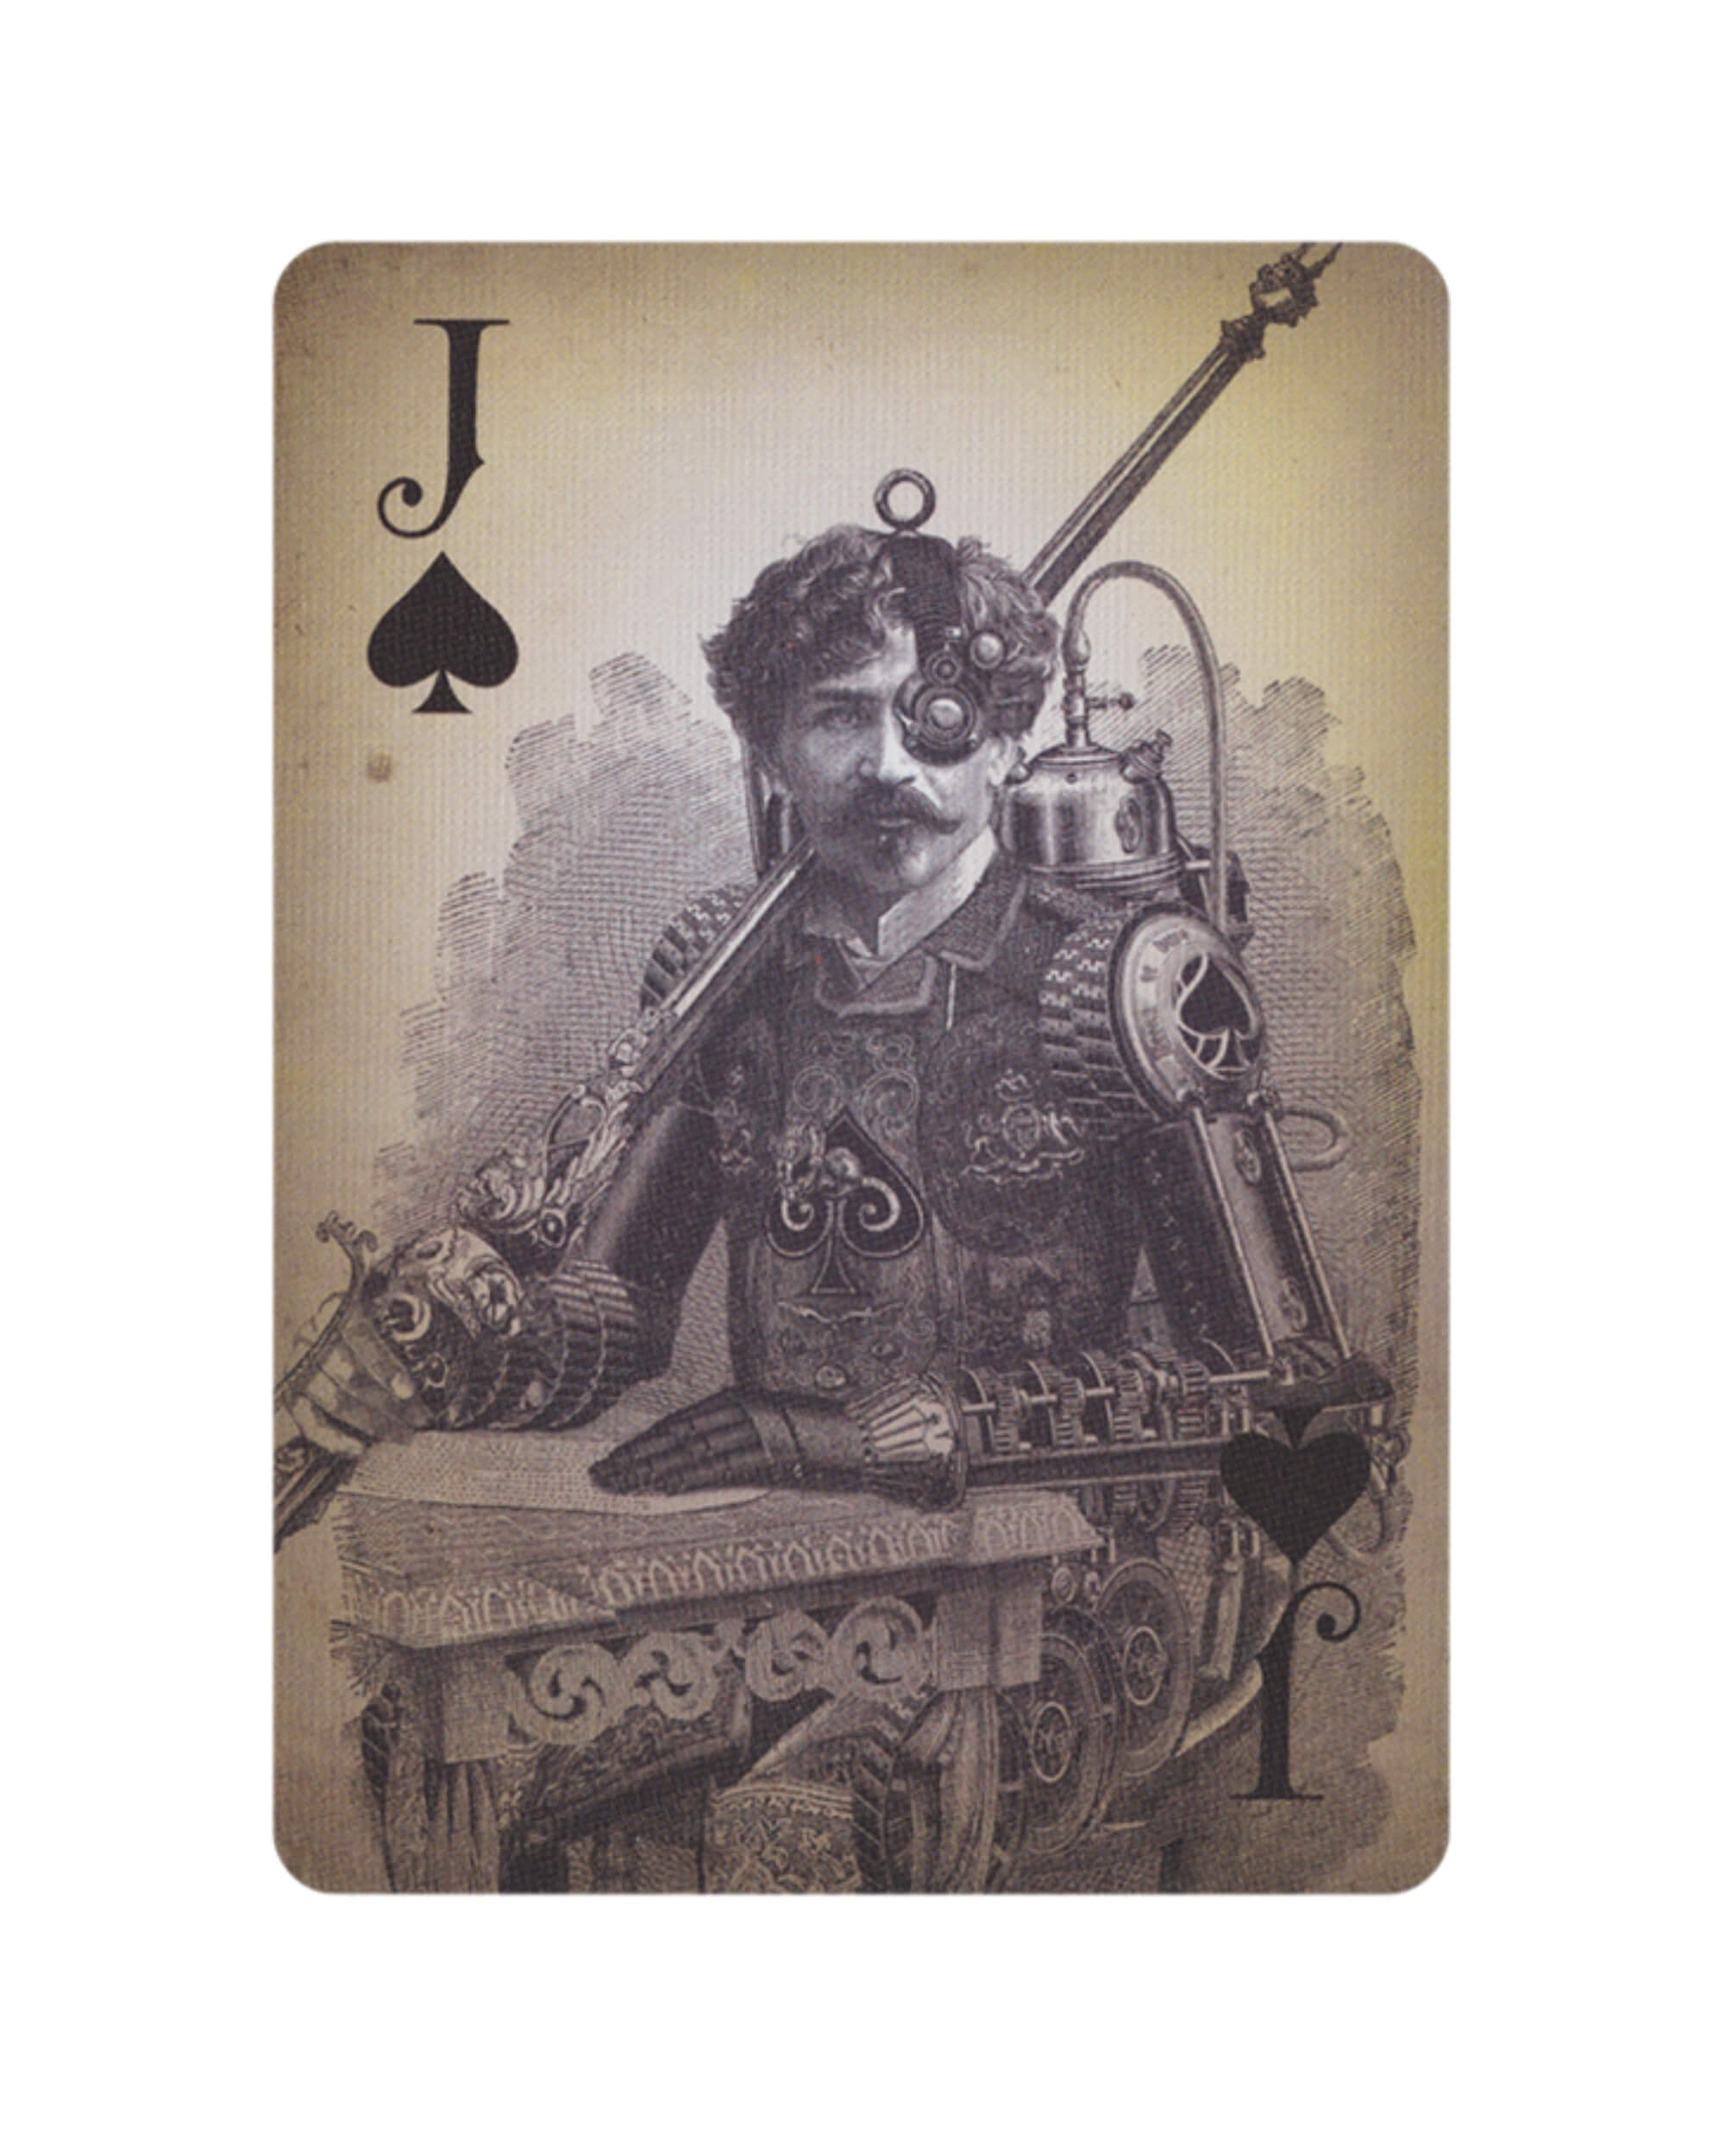 art of play : ultimate playing cards